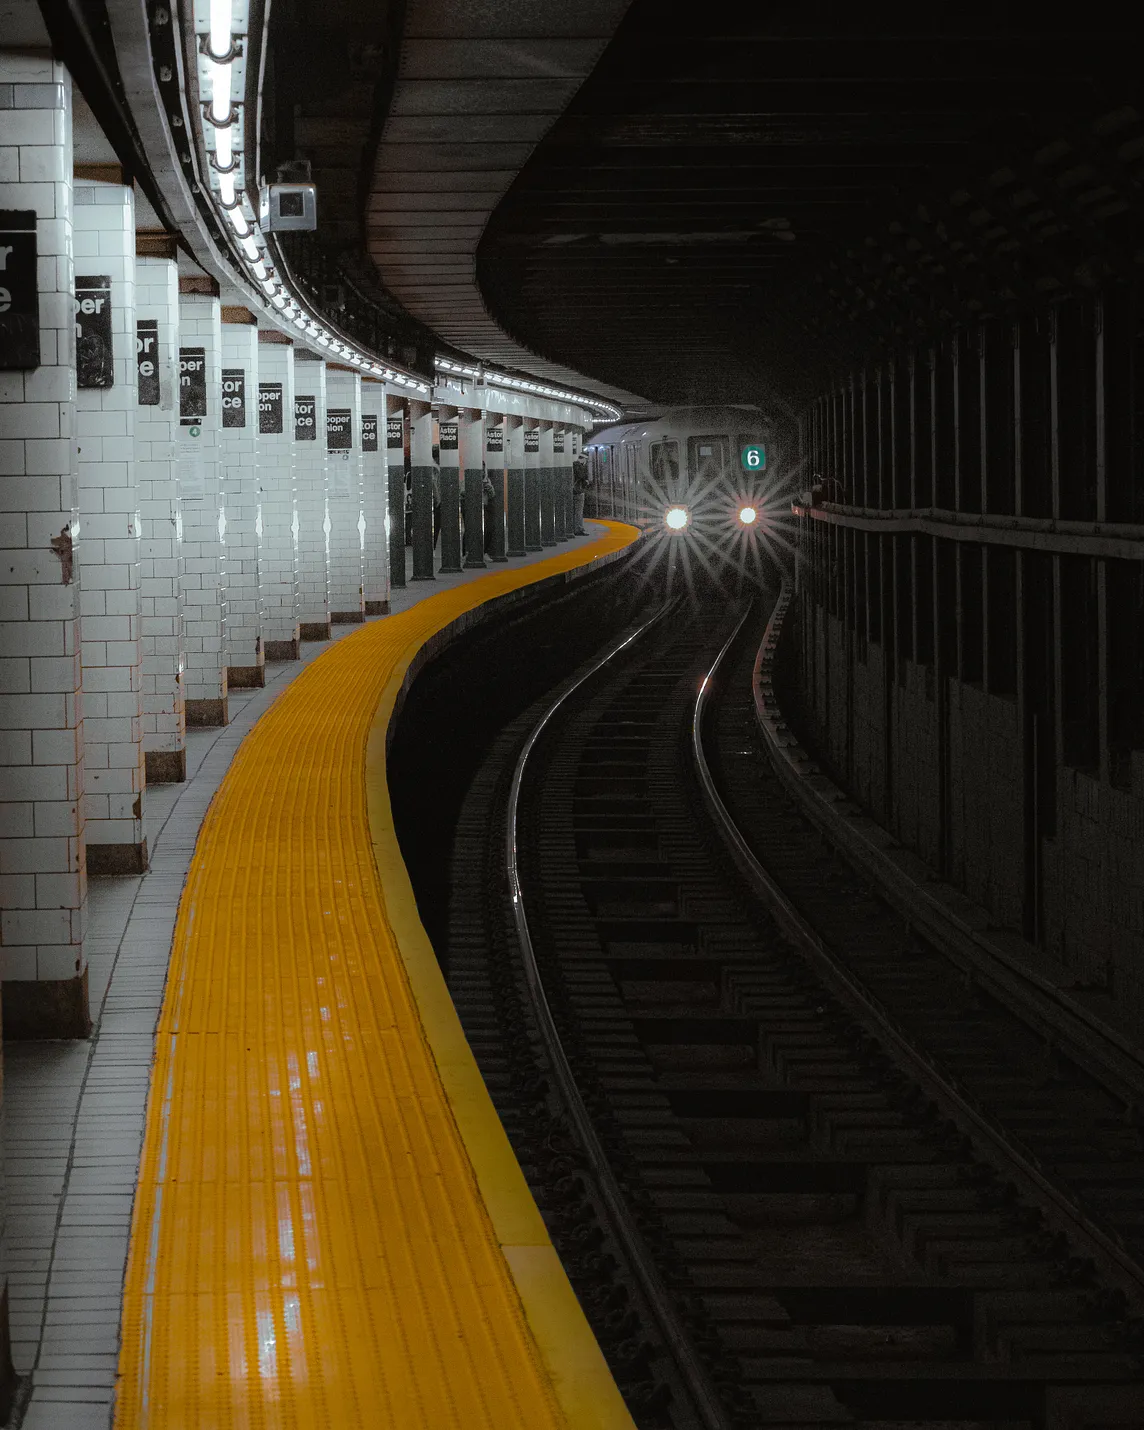 What I Learned in My Time As a New York City Subway Rat